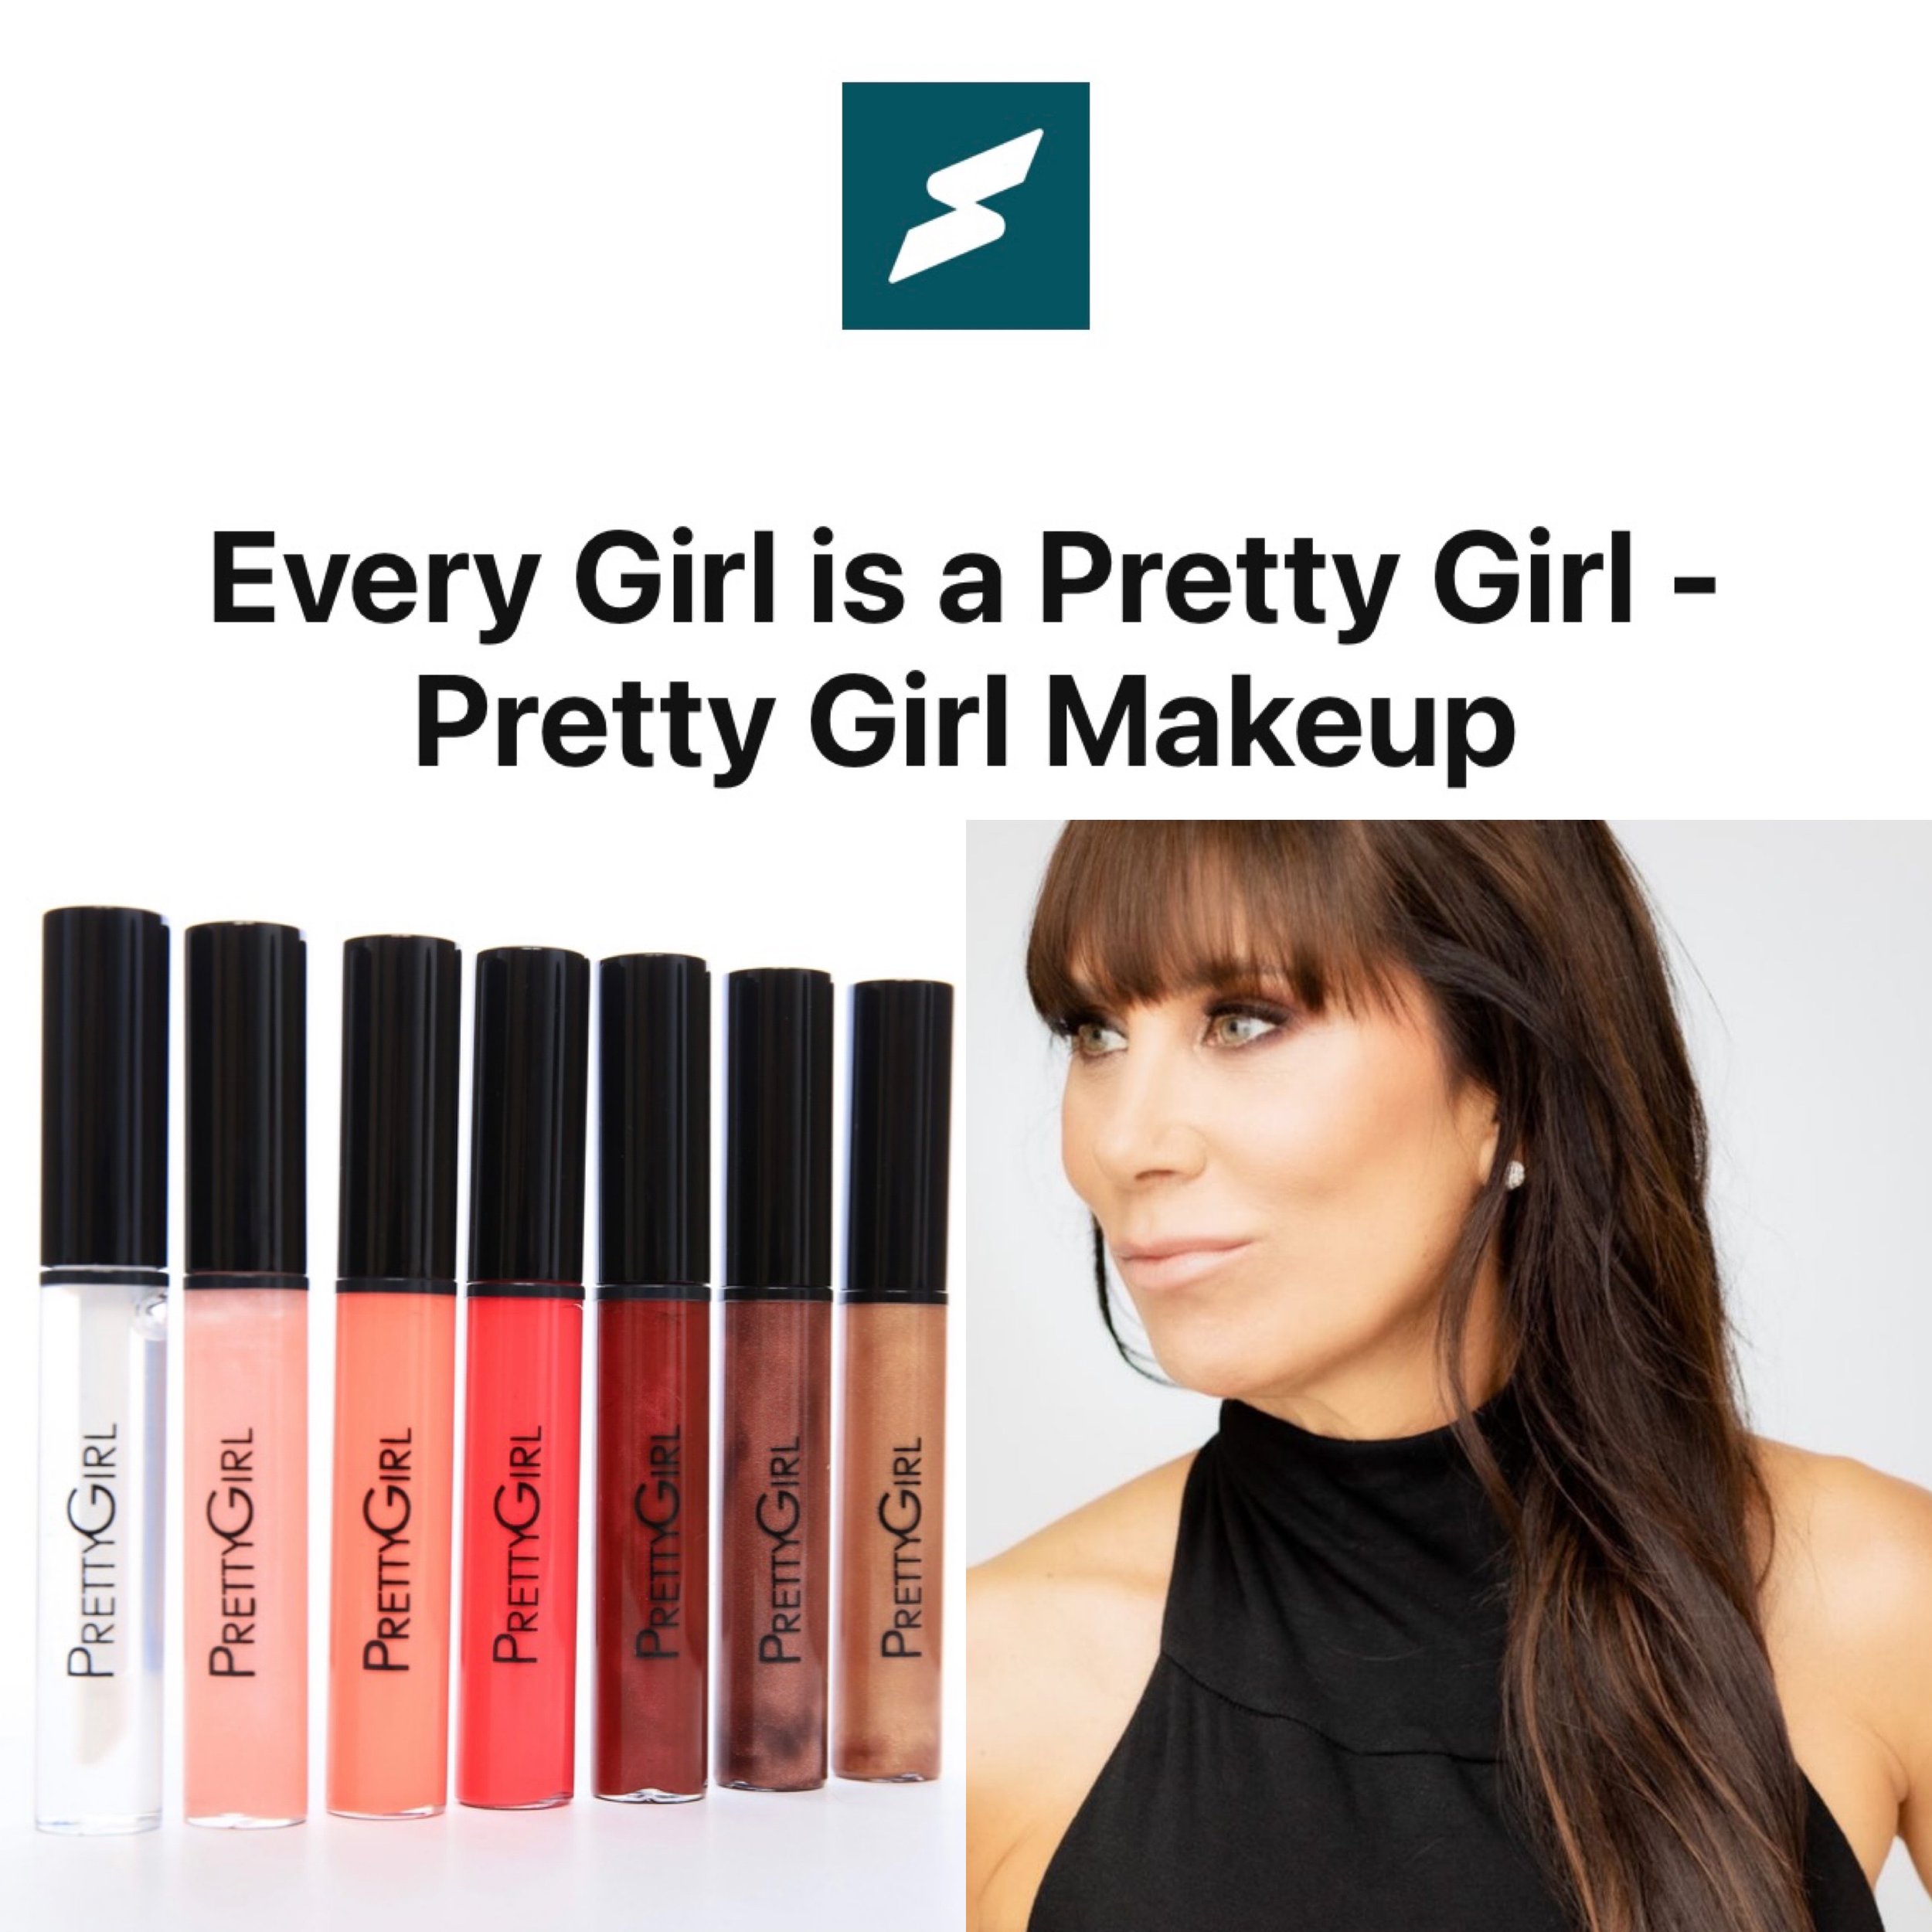 Every Girl is a Pretty Girl- Pretty Girl Makeup